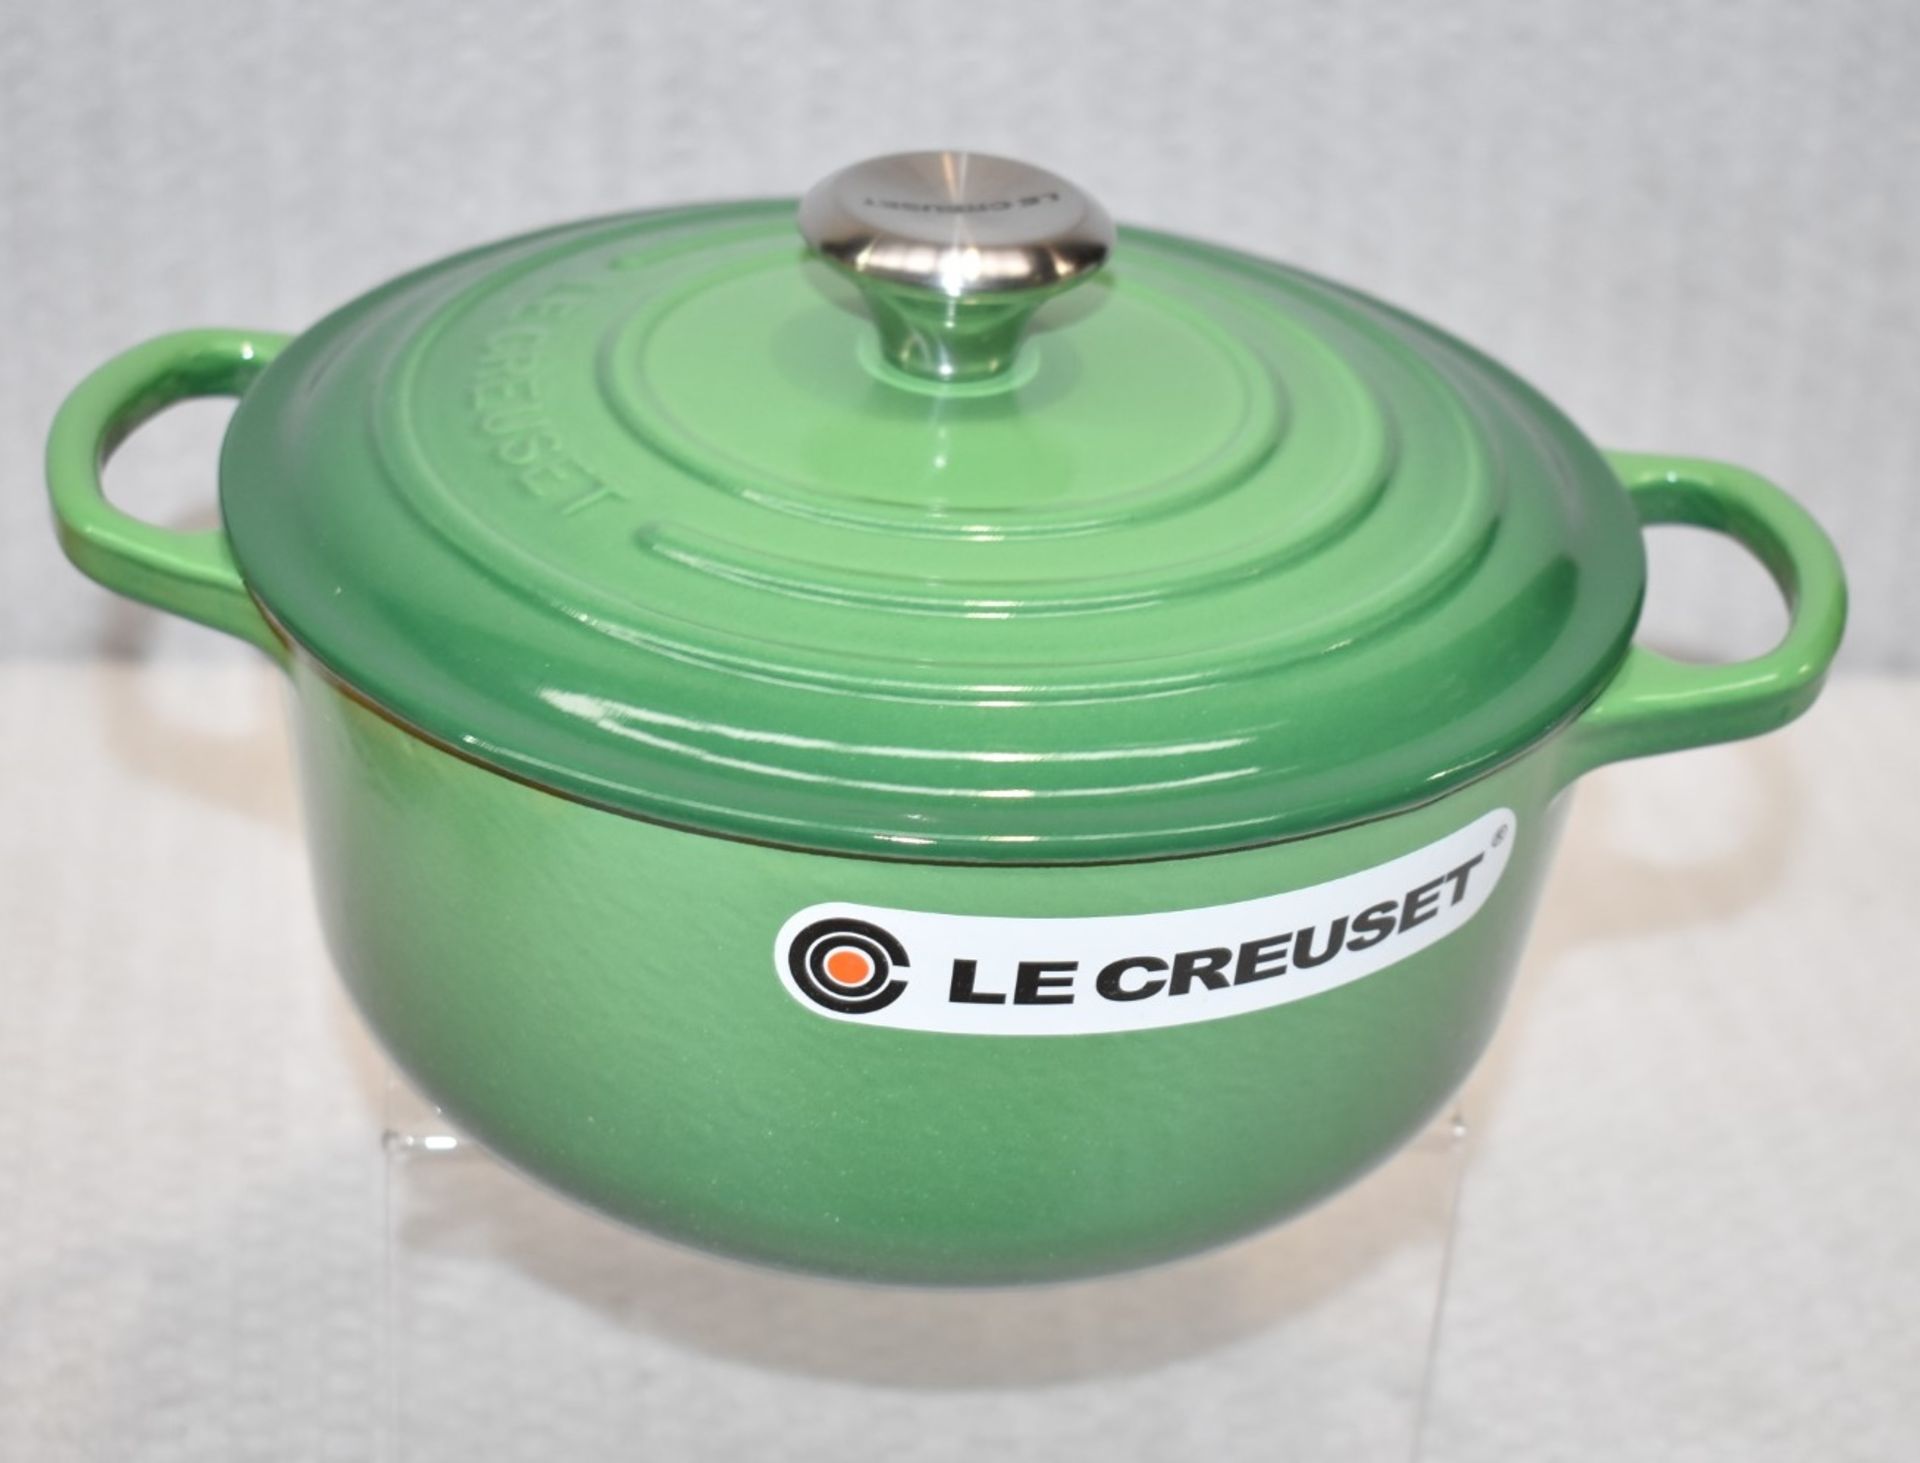 1 x LE CREUSET Enamelled Cast Iron Round Casserole Dish in Bamboo Green (20cm) - RRP £215.00 - Image 7 of 16